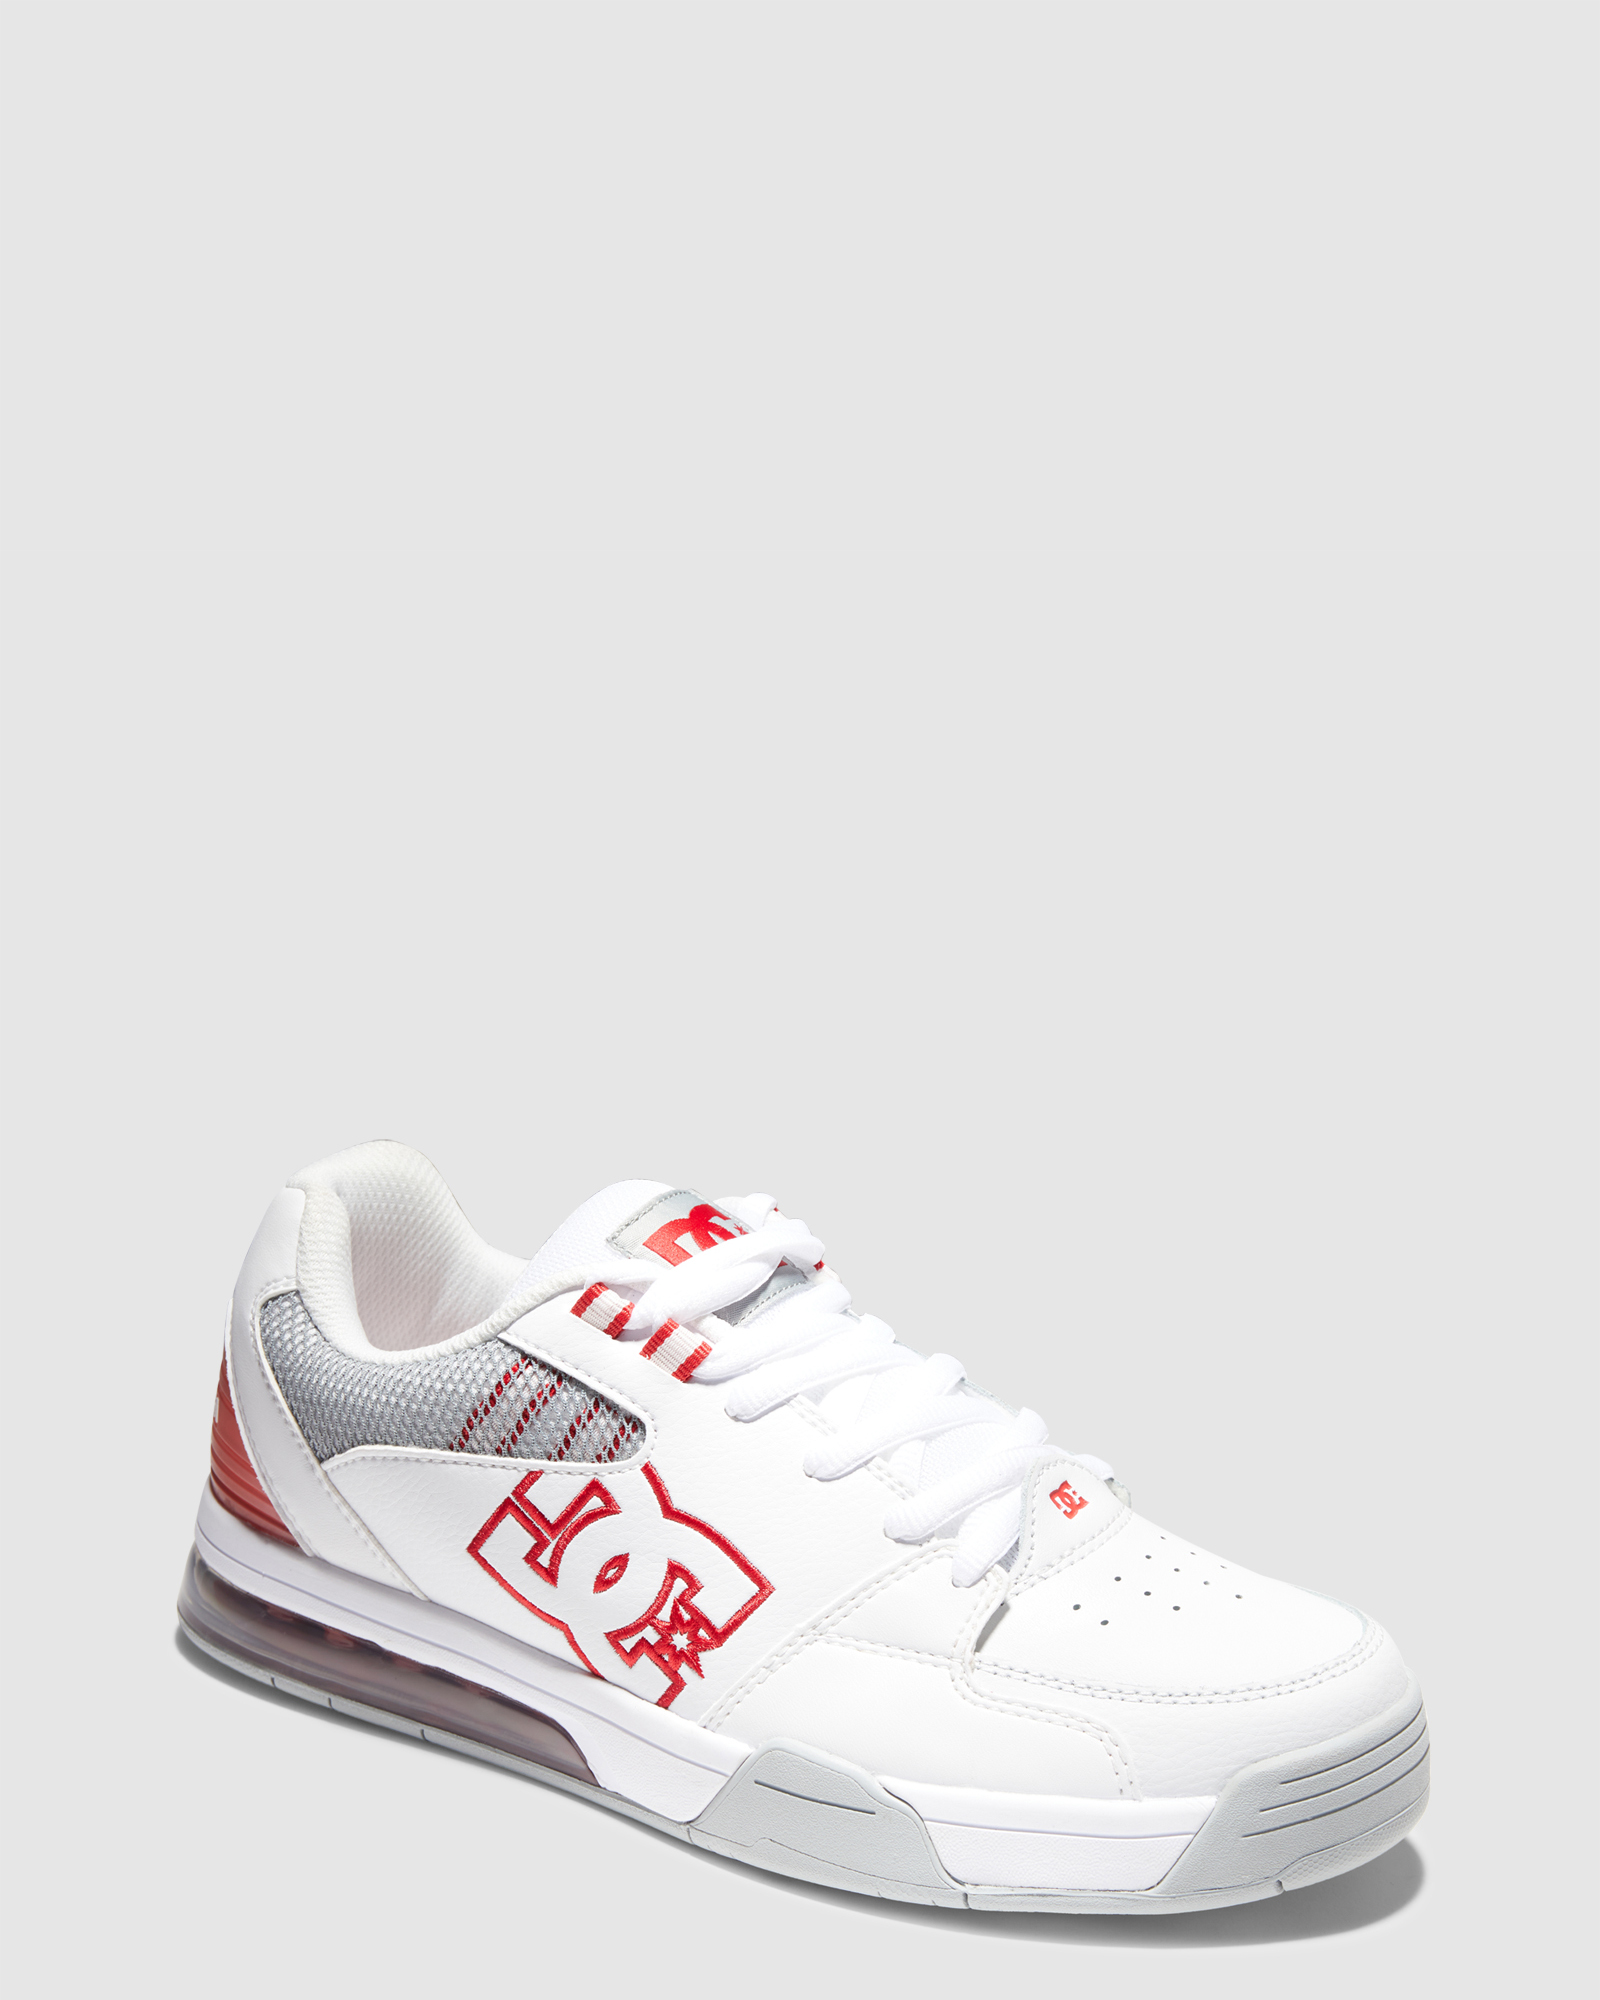 Dc Shoes Versatile Shoe - White Grey Red | SurfStitch